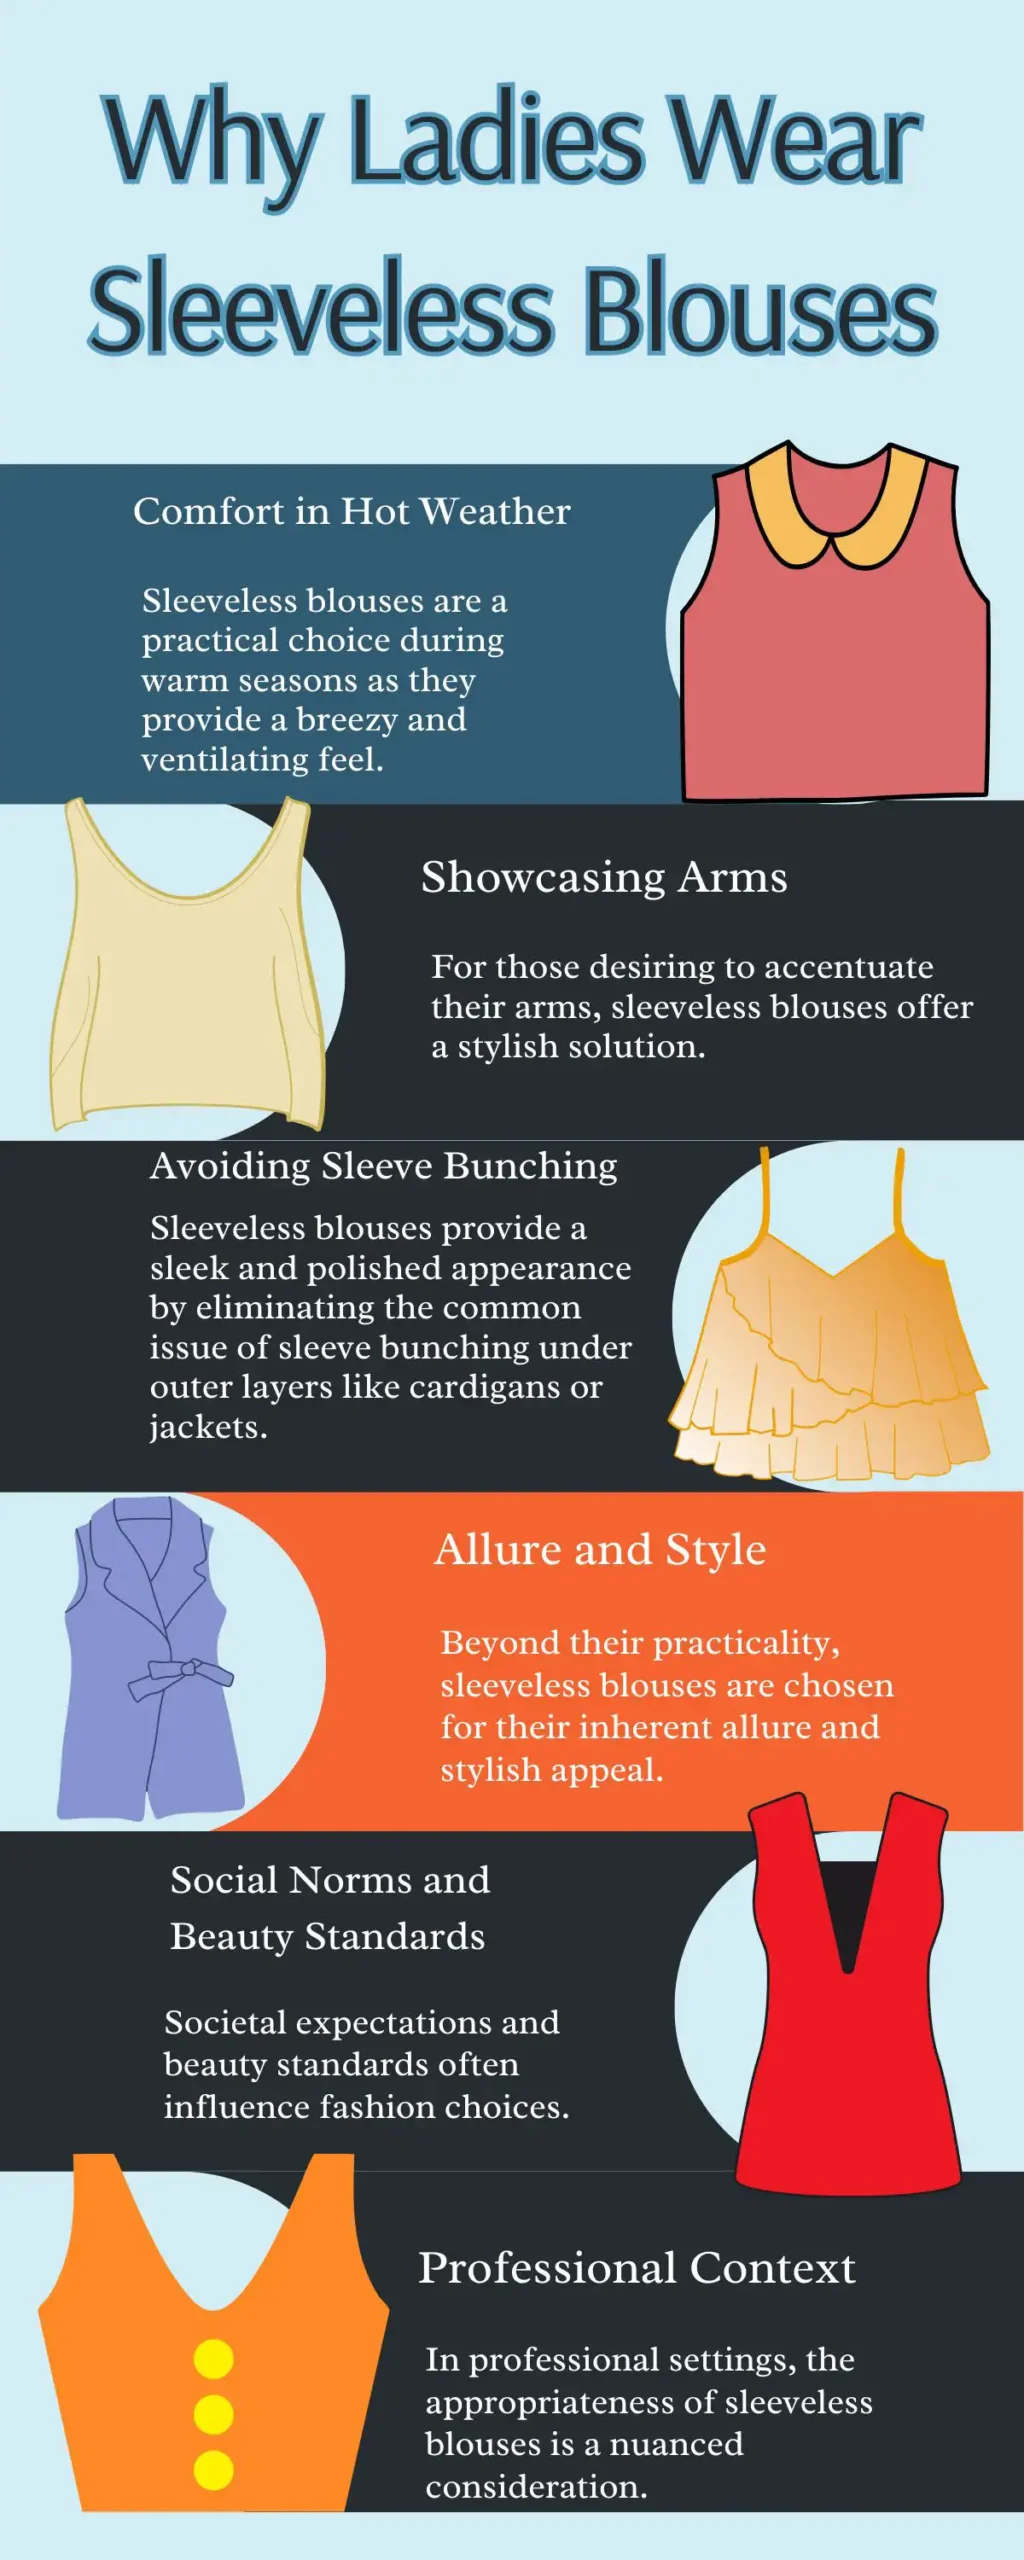 Why ladies wear sleeveless blouses - info